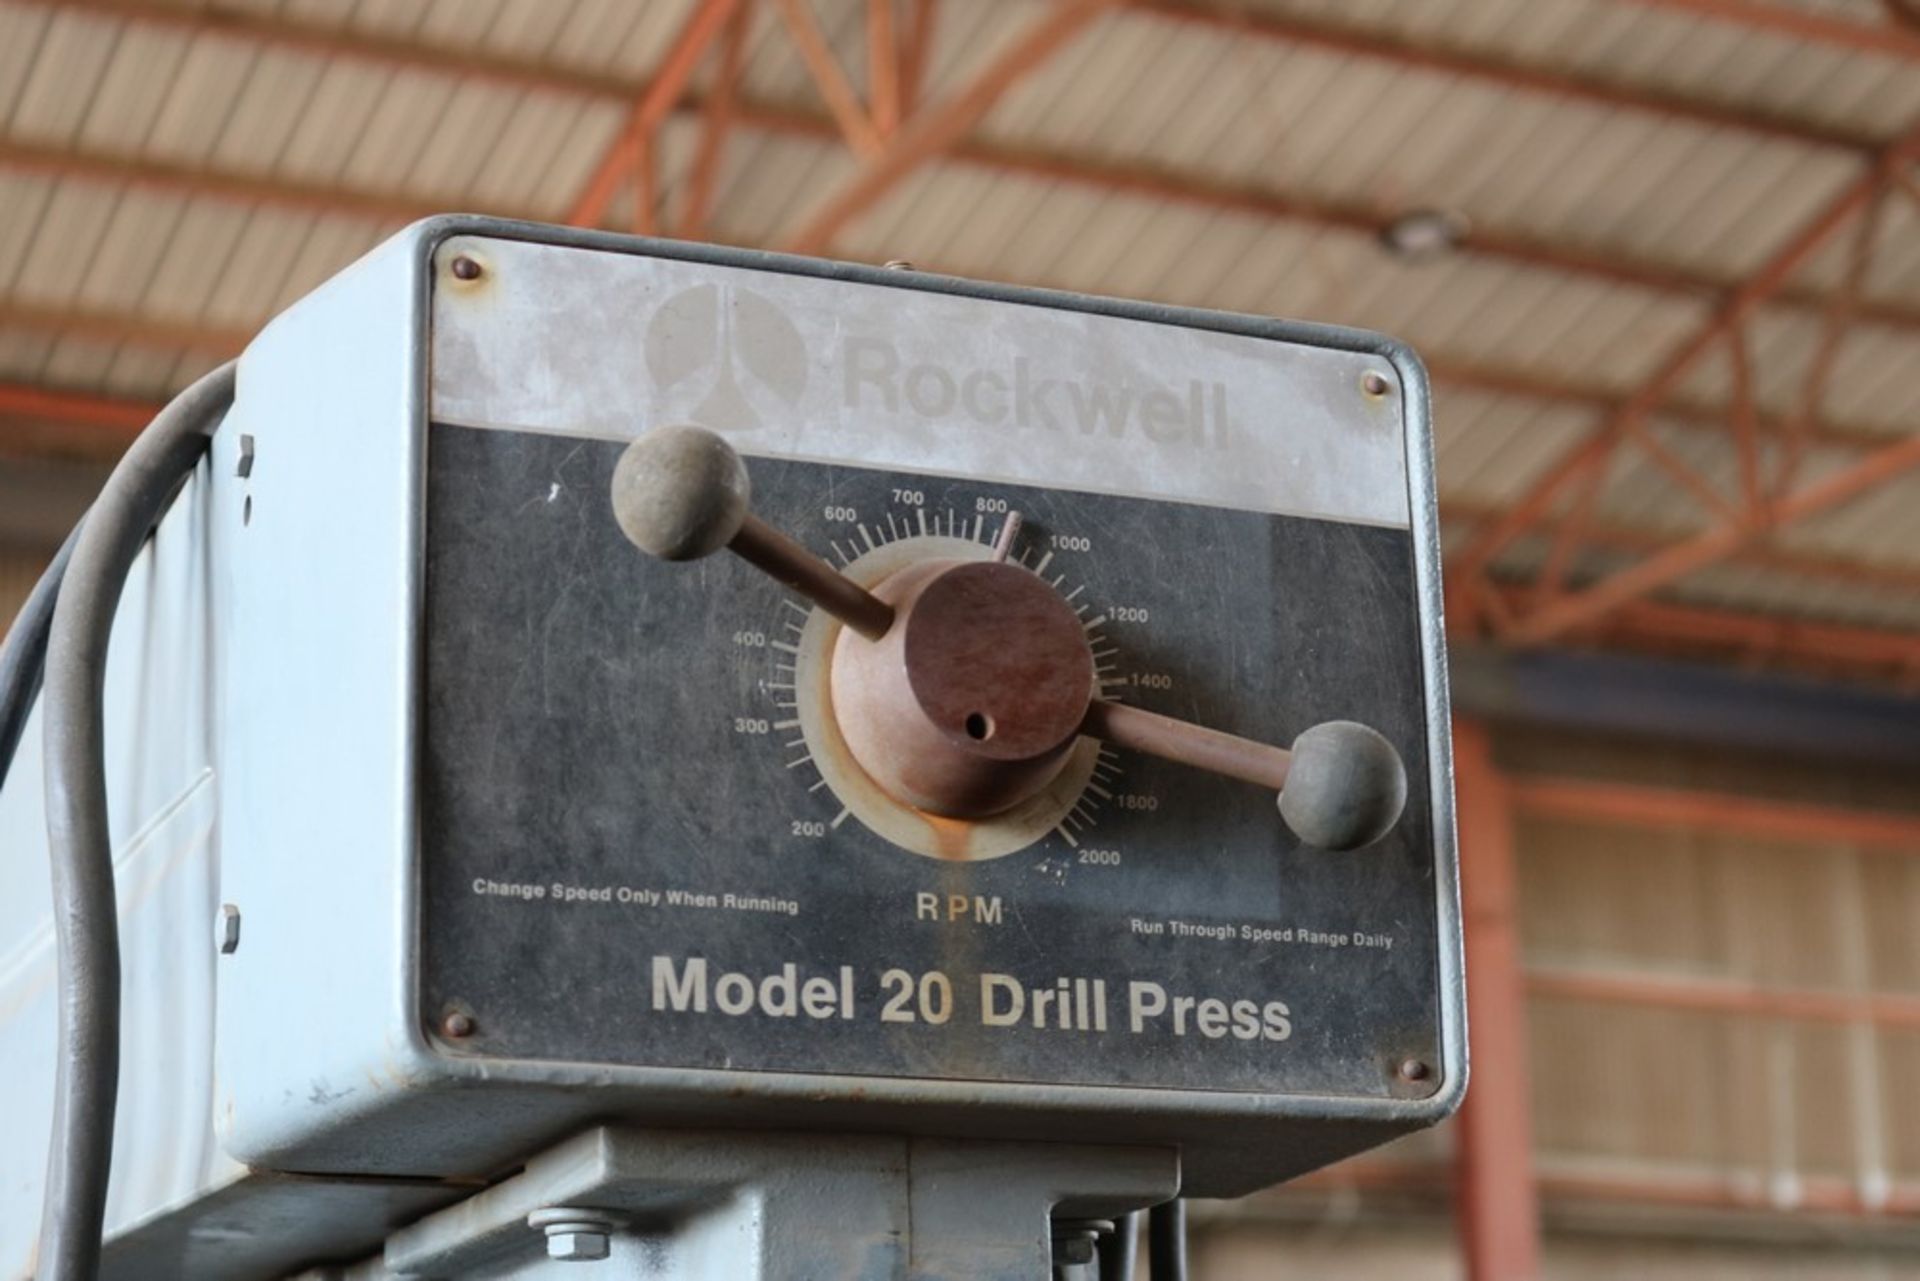 Rockwell model 20 drill press, condition unknown - Image 3 of 4